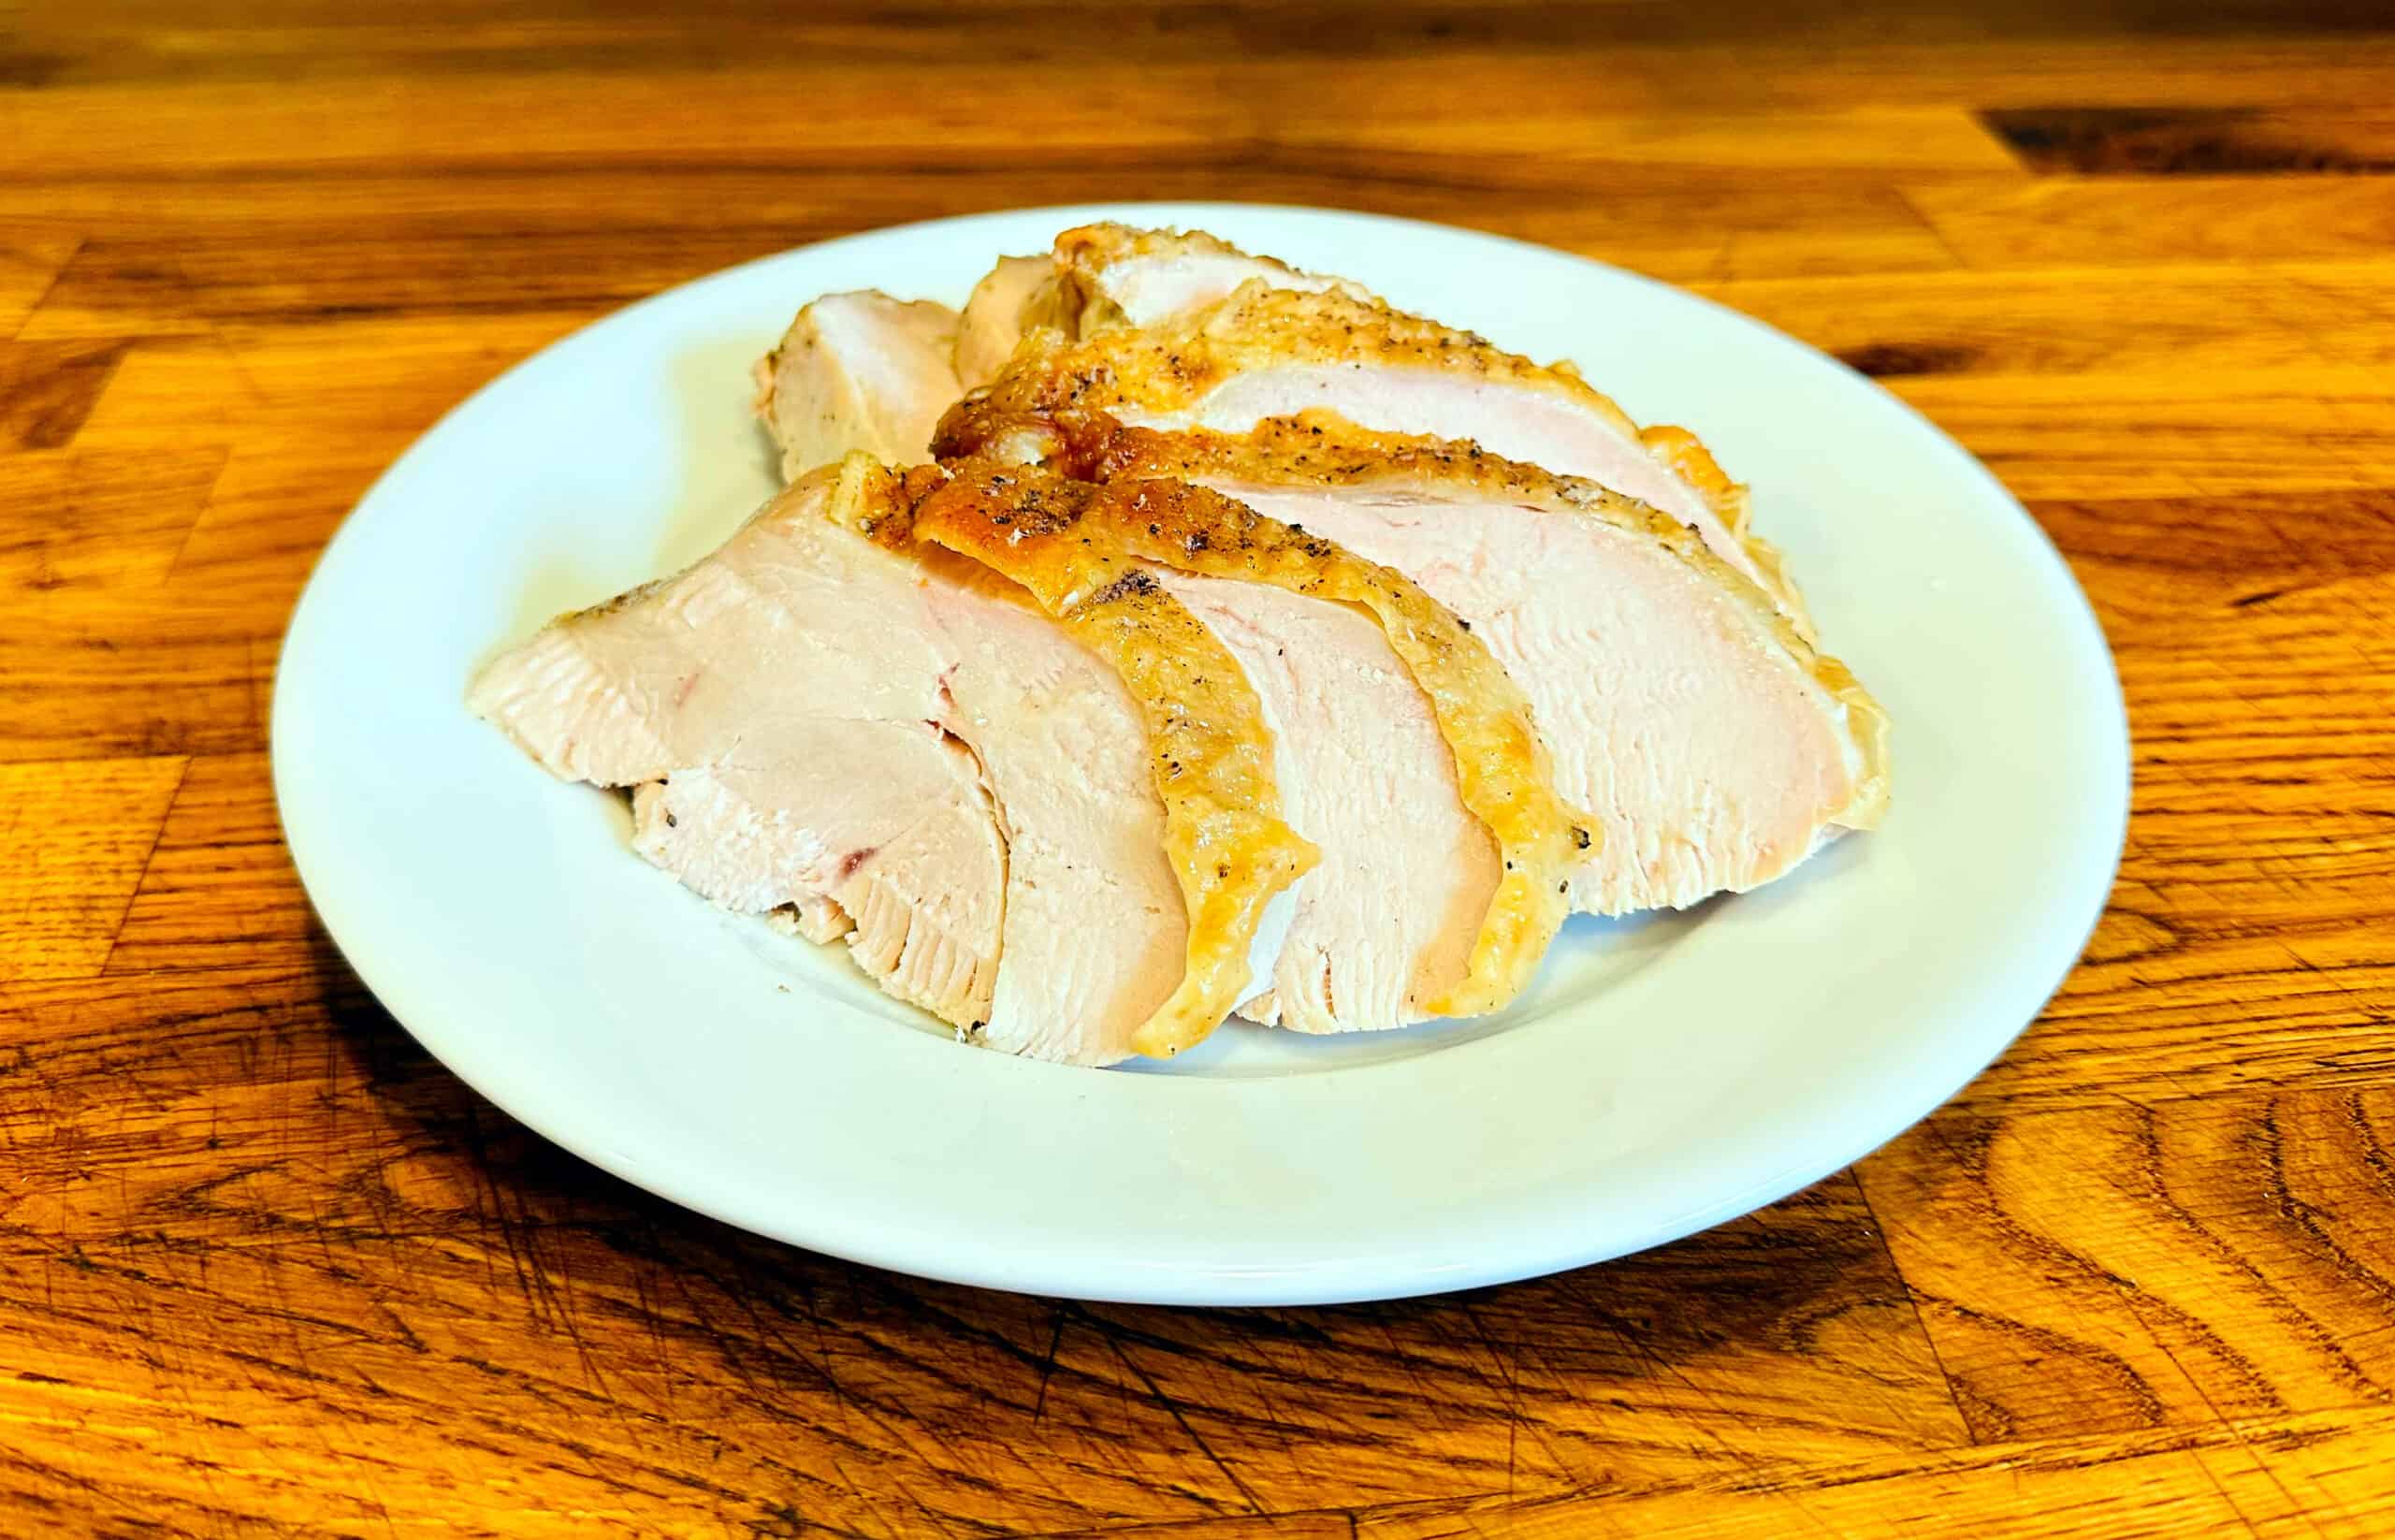 Sliced roasted turkey breast fanned out on a white plate sitting on a wood countertop.